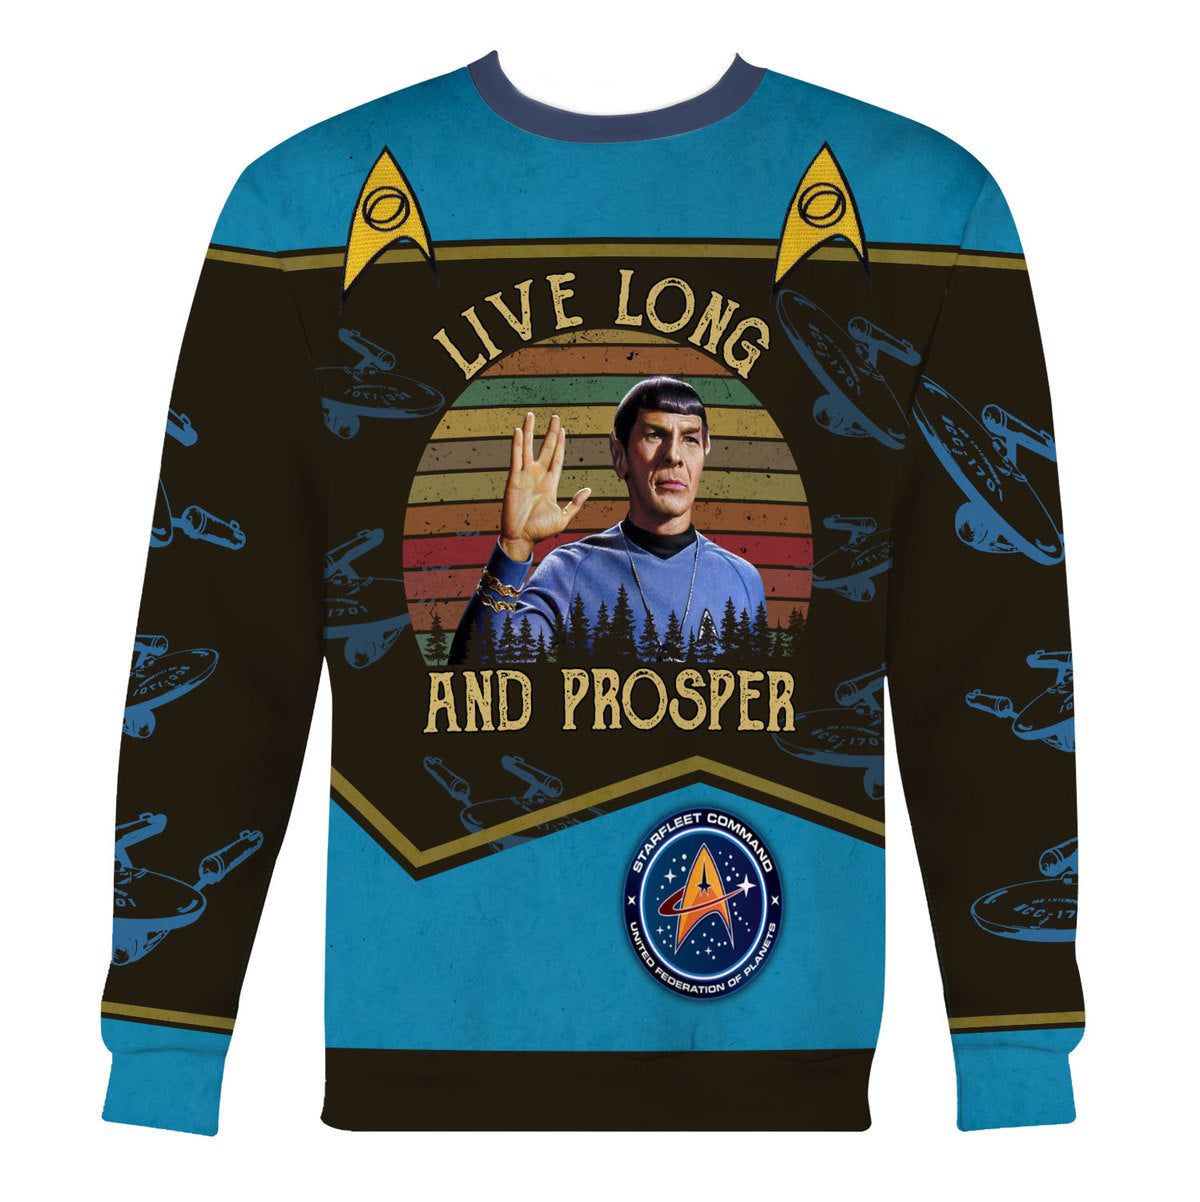 Star Trek Live Long And Prosper Sunset Retro Vintage Cool - Sweater - Ugly Christmas Sweater